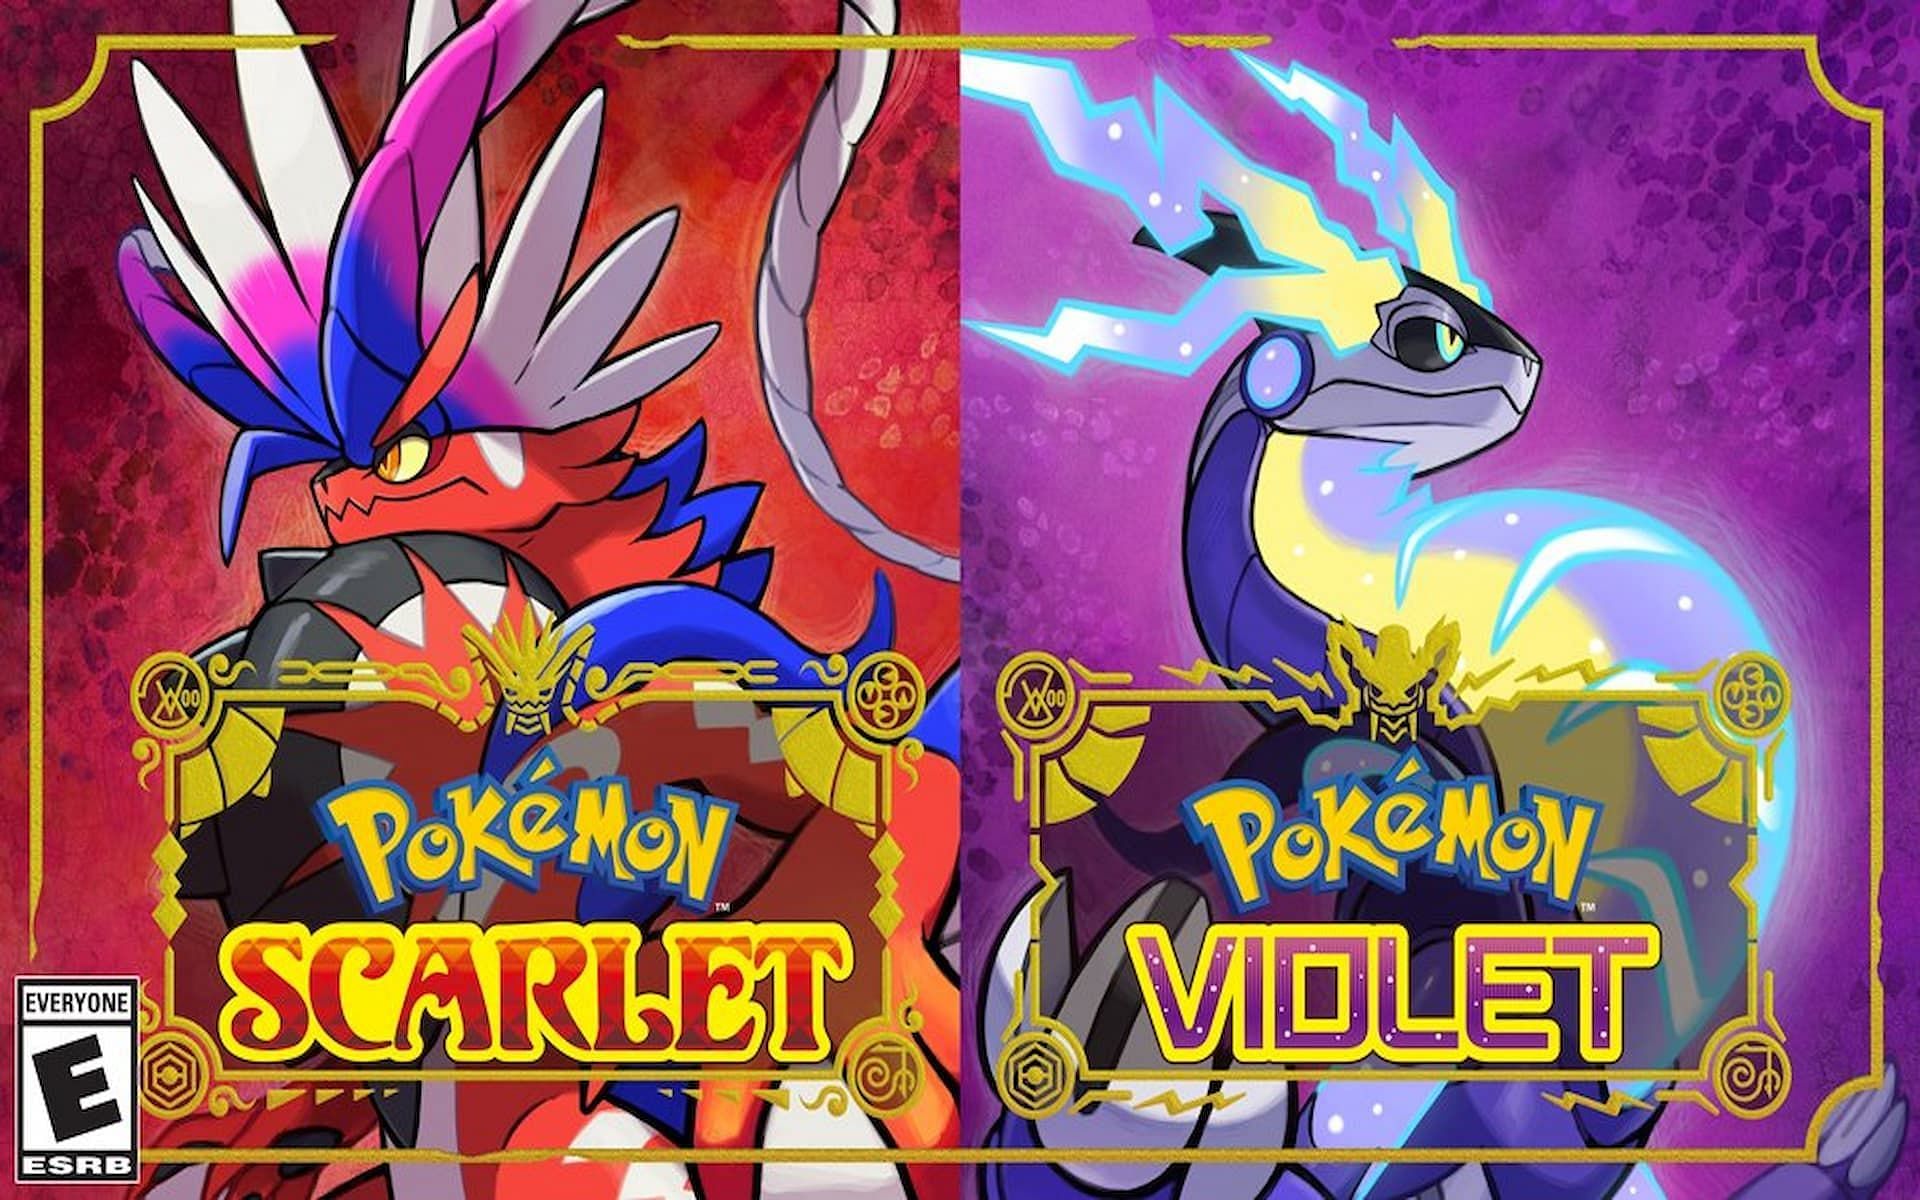 More info about Pokemon Scarlet and Violet just keeps on coming (Image via Game Freak)